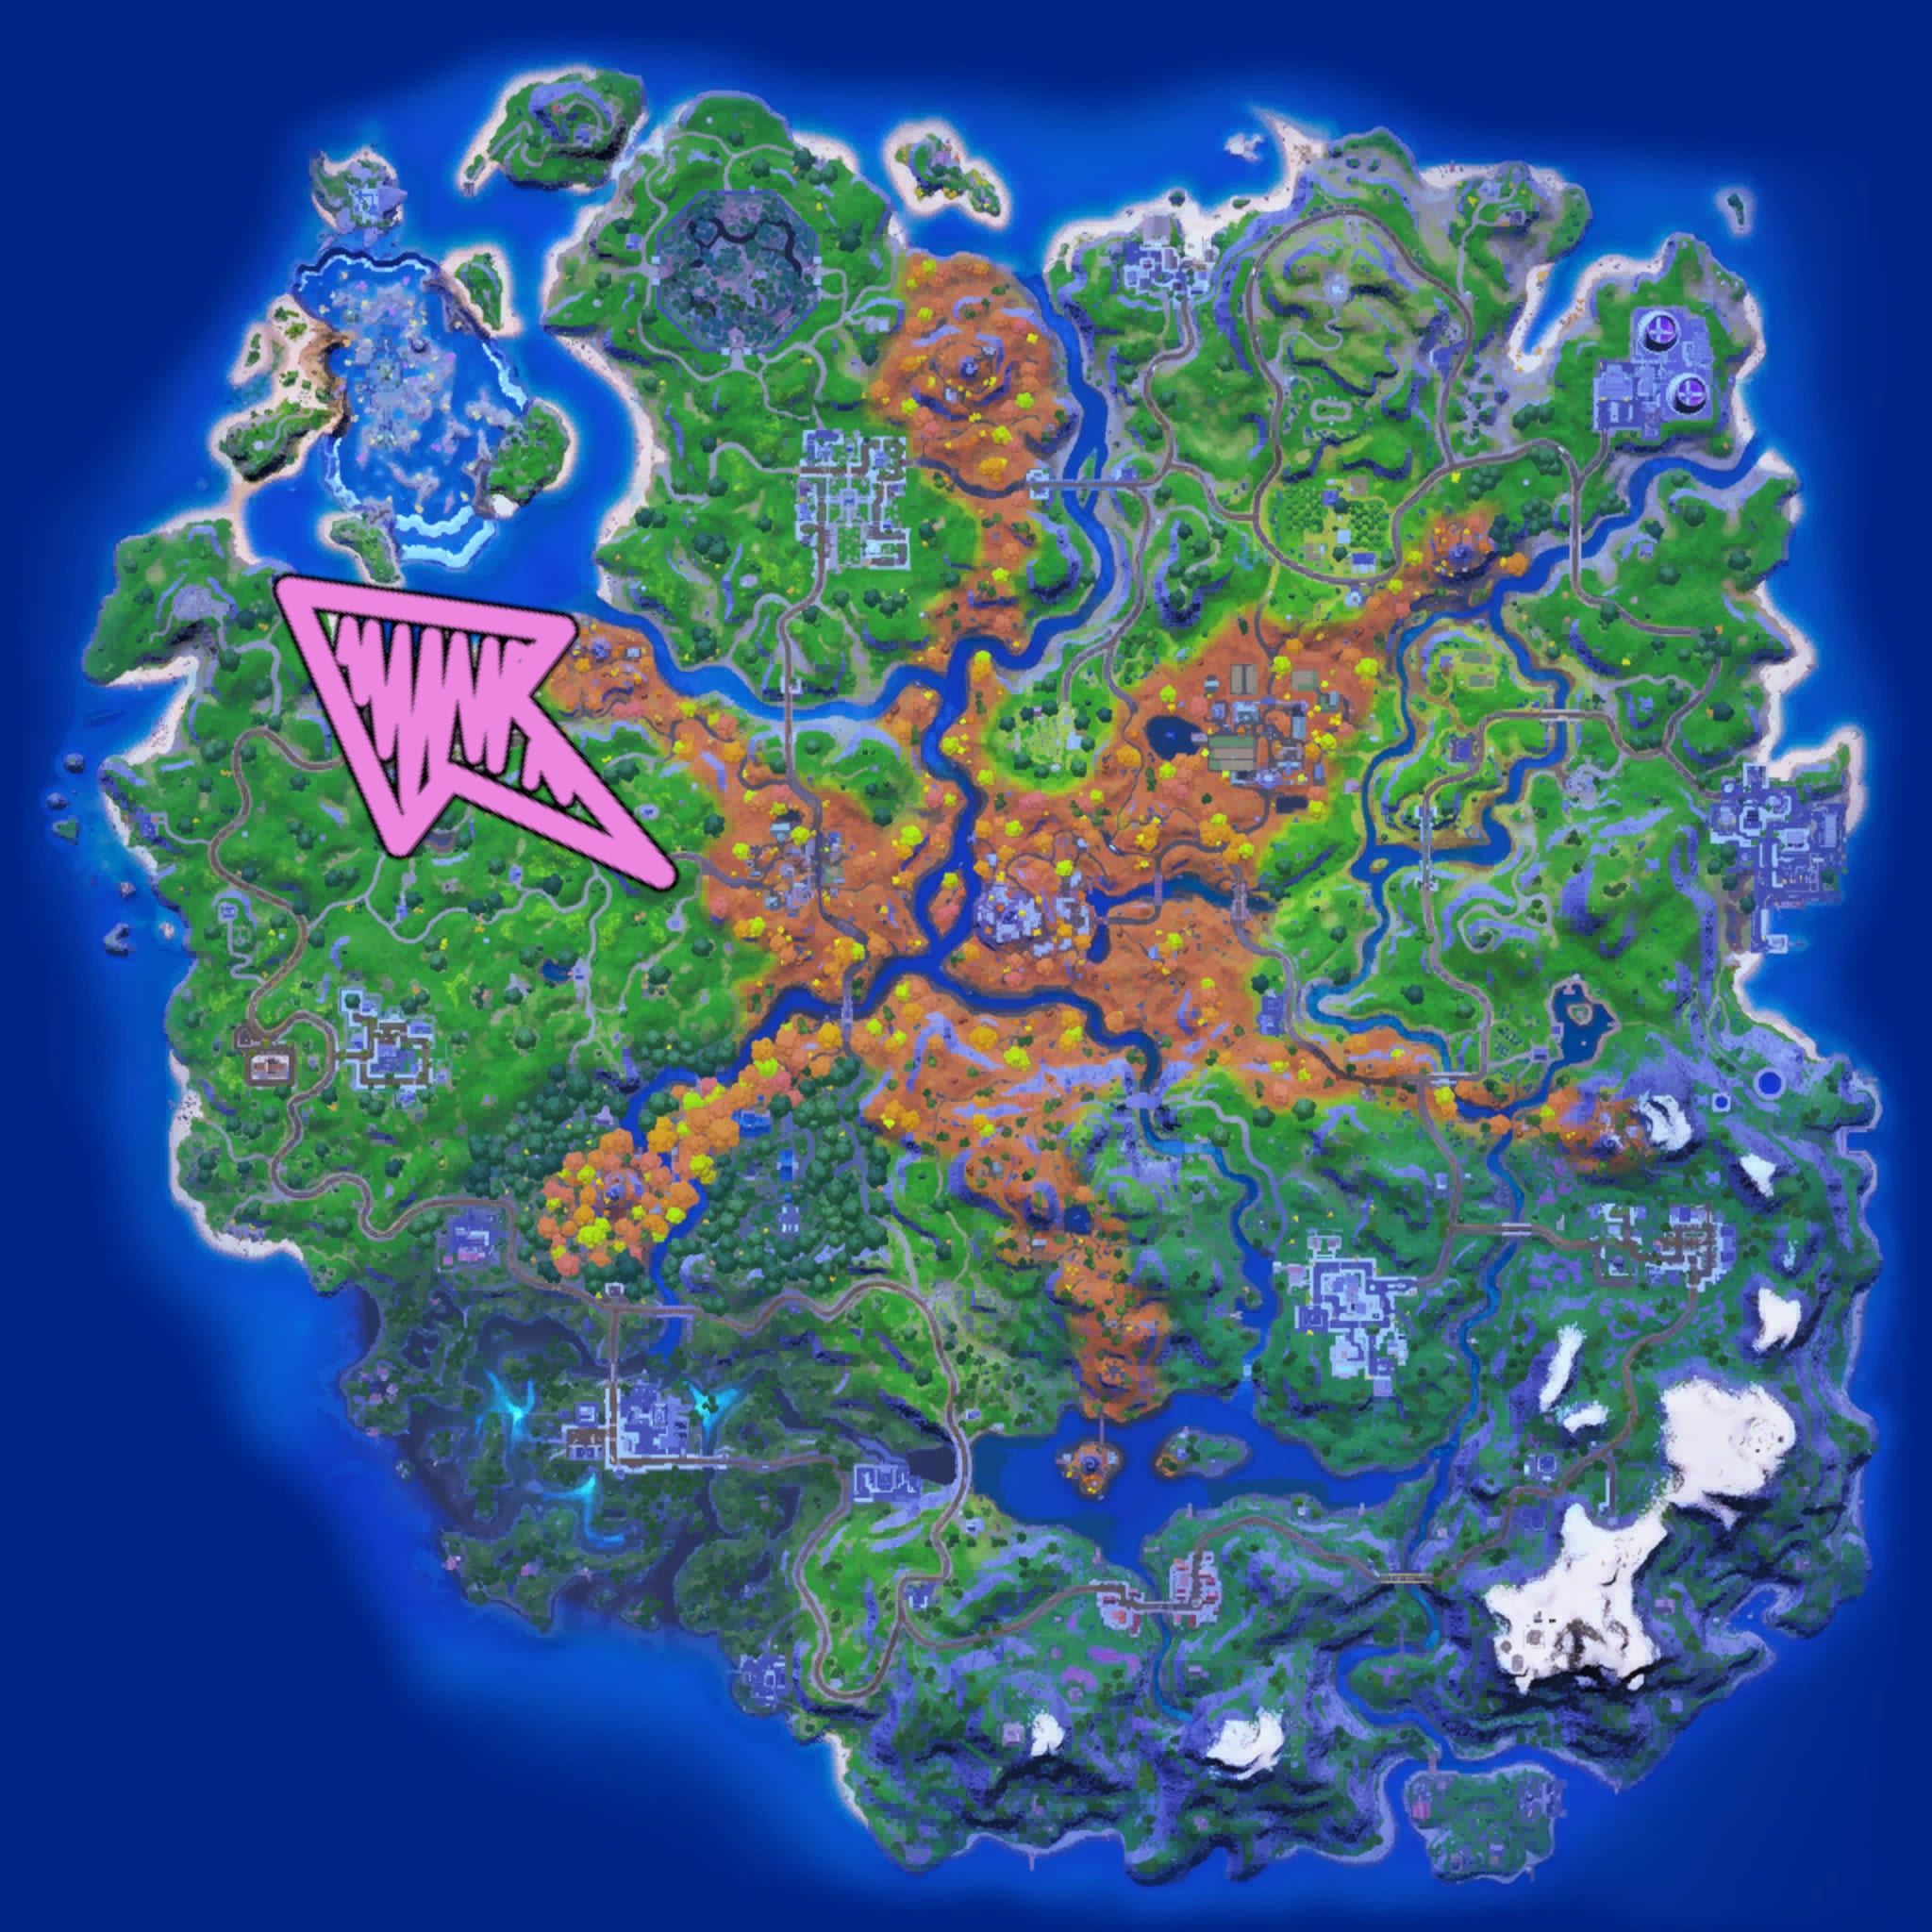 Where to find the Unstable Bow in Fortnite?